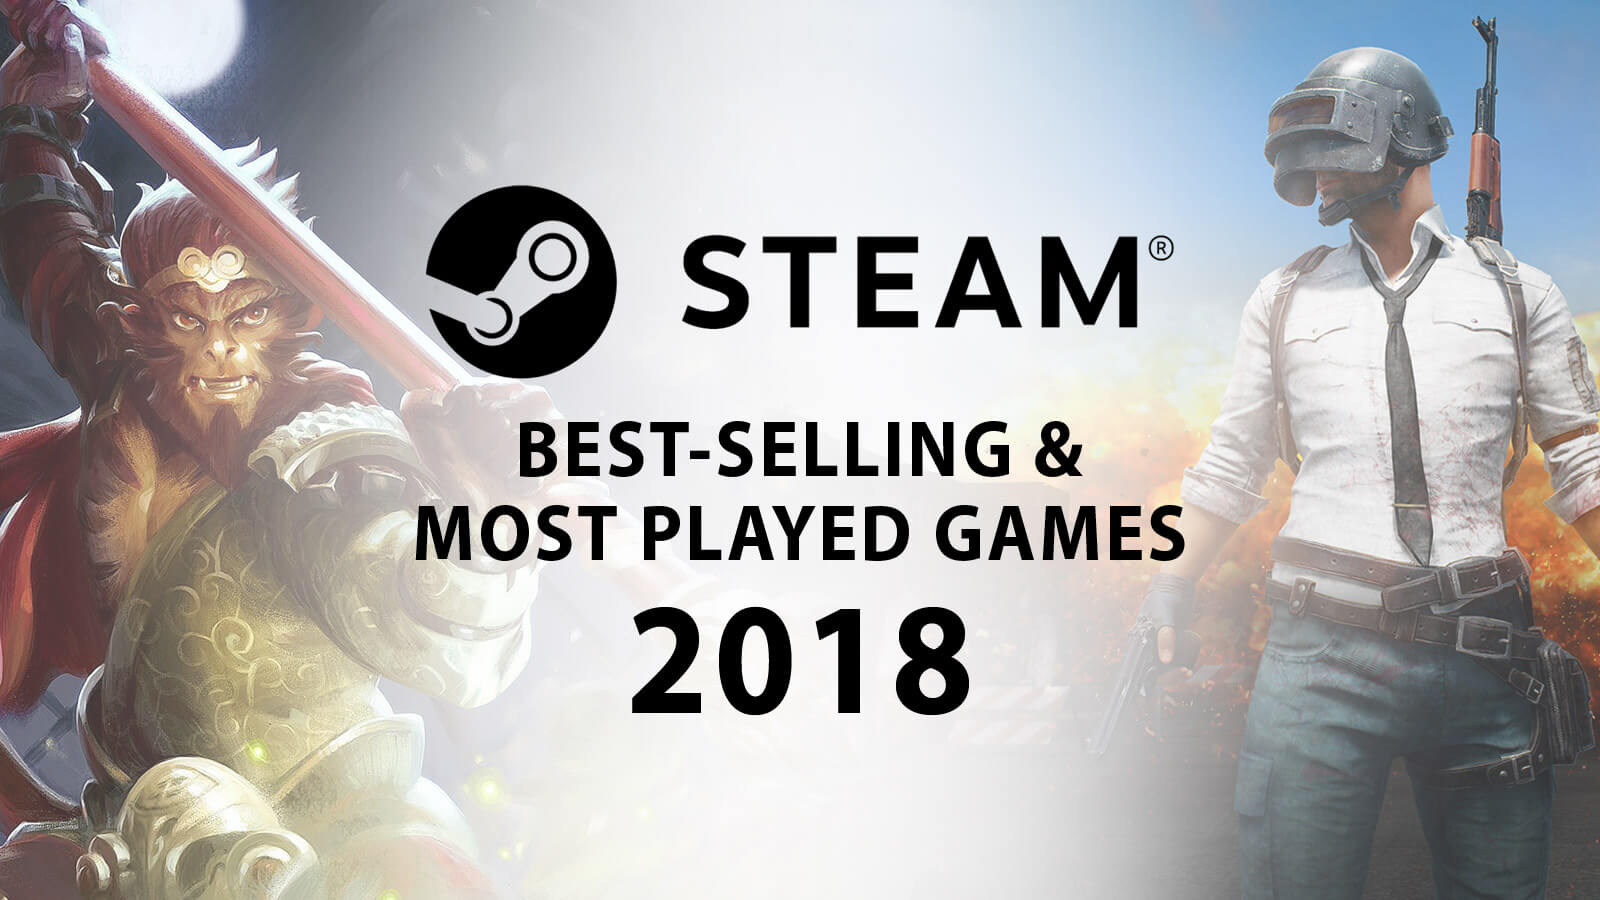 Steam Best-Selling & Most Played Games of 2018